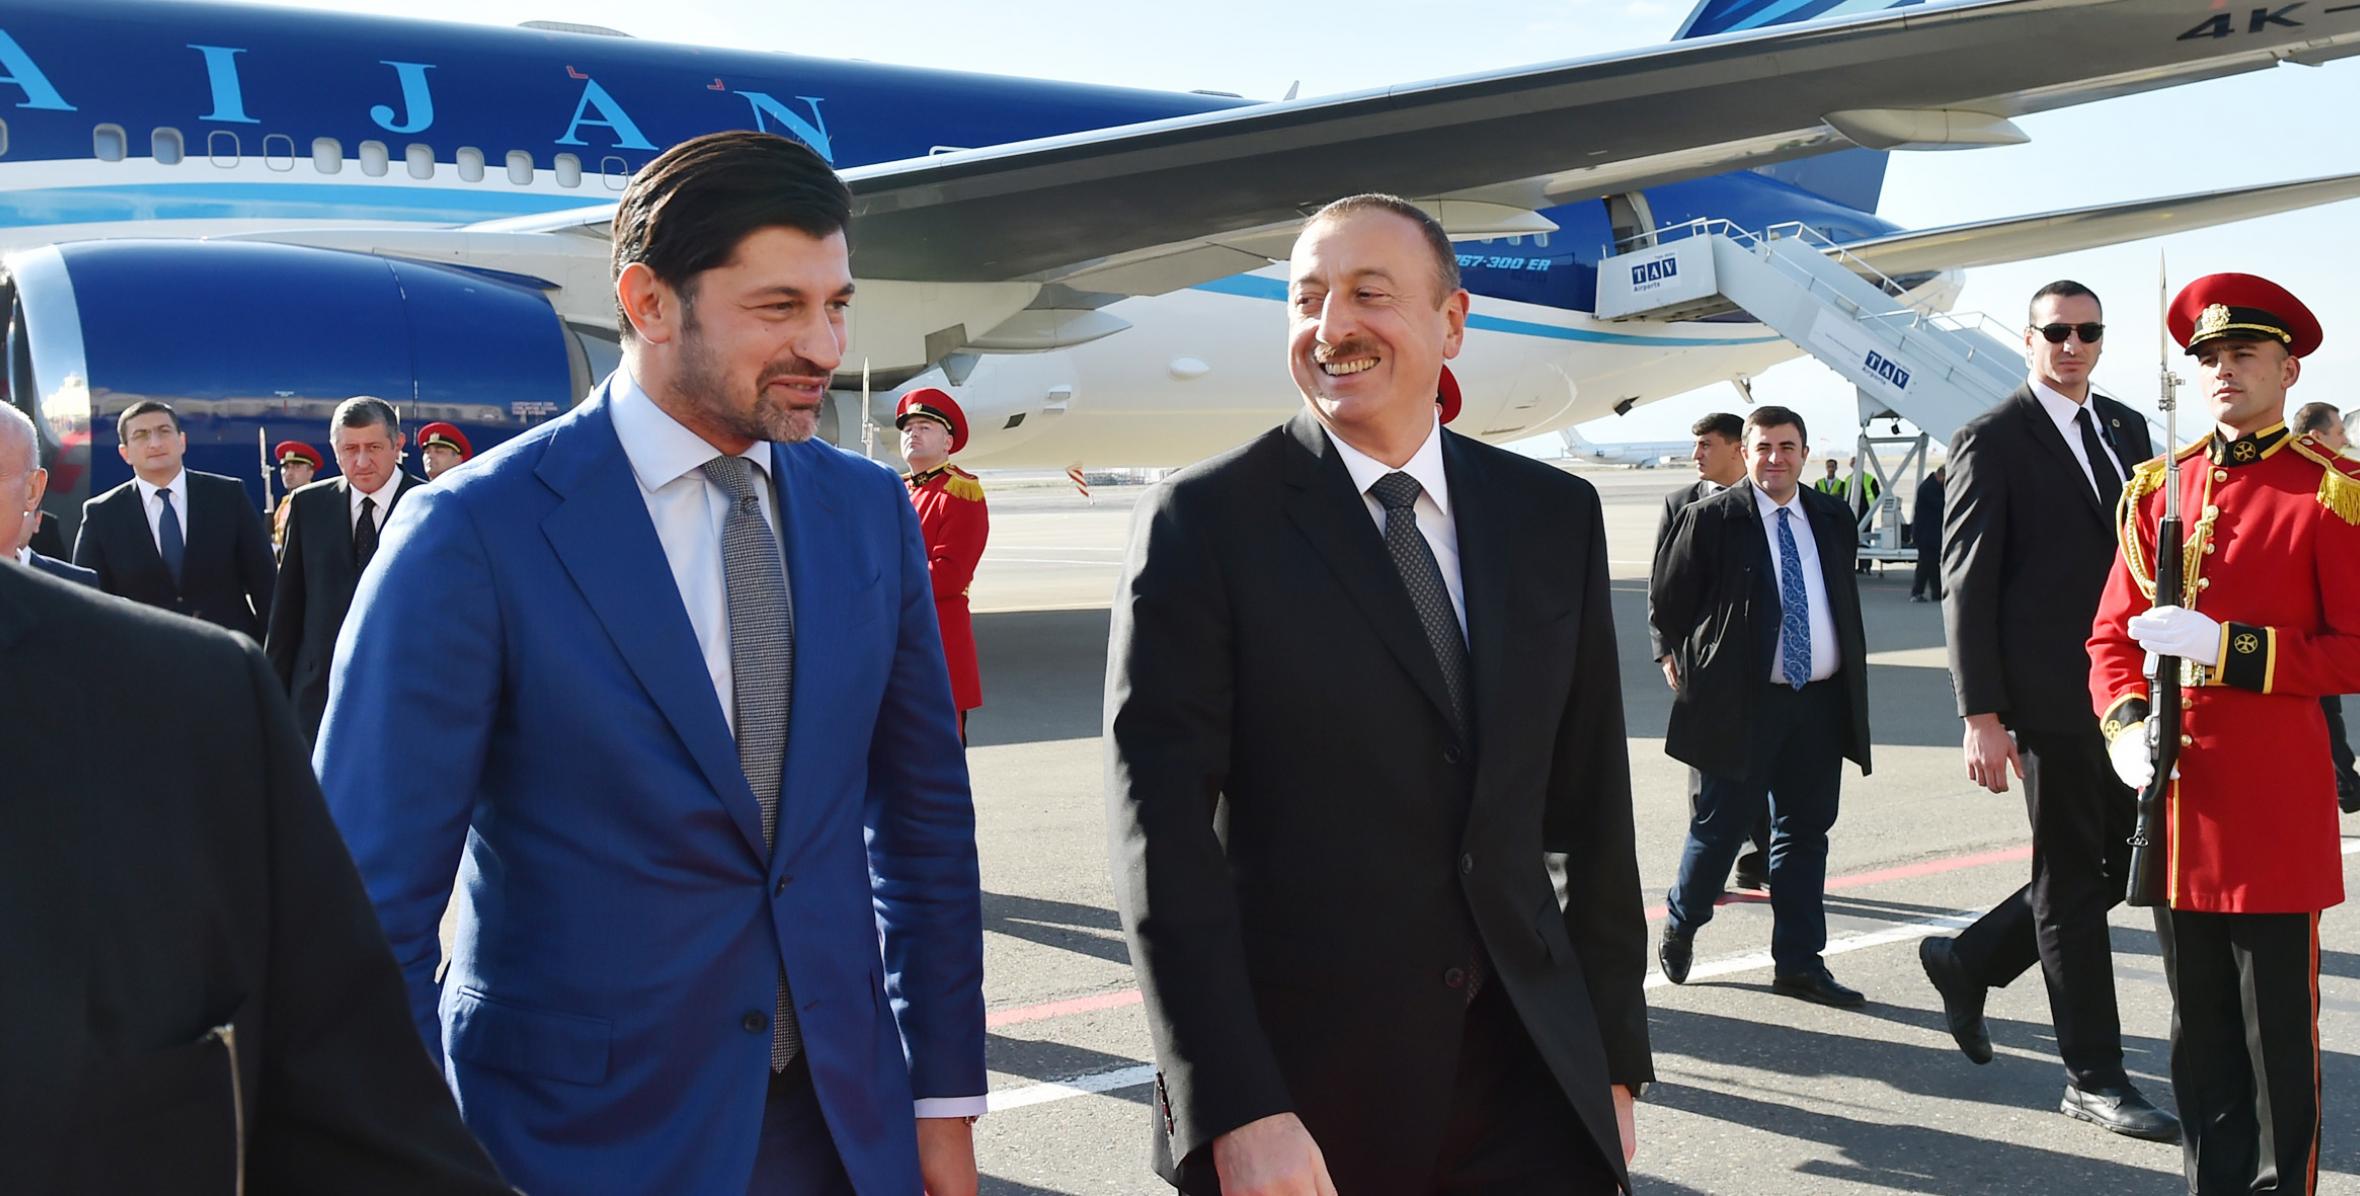 Ilham Aliyev arrived in Georgia on an official visit